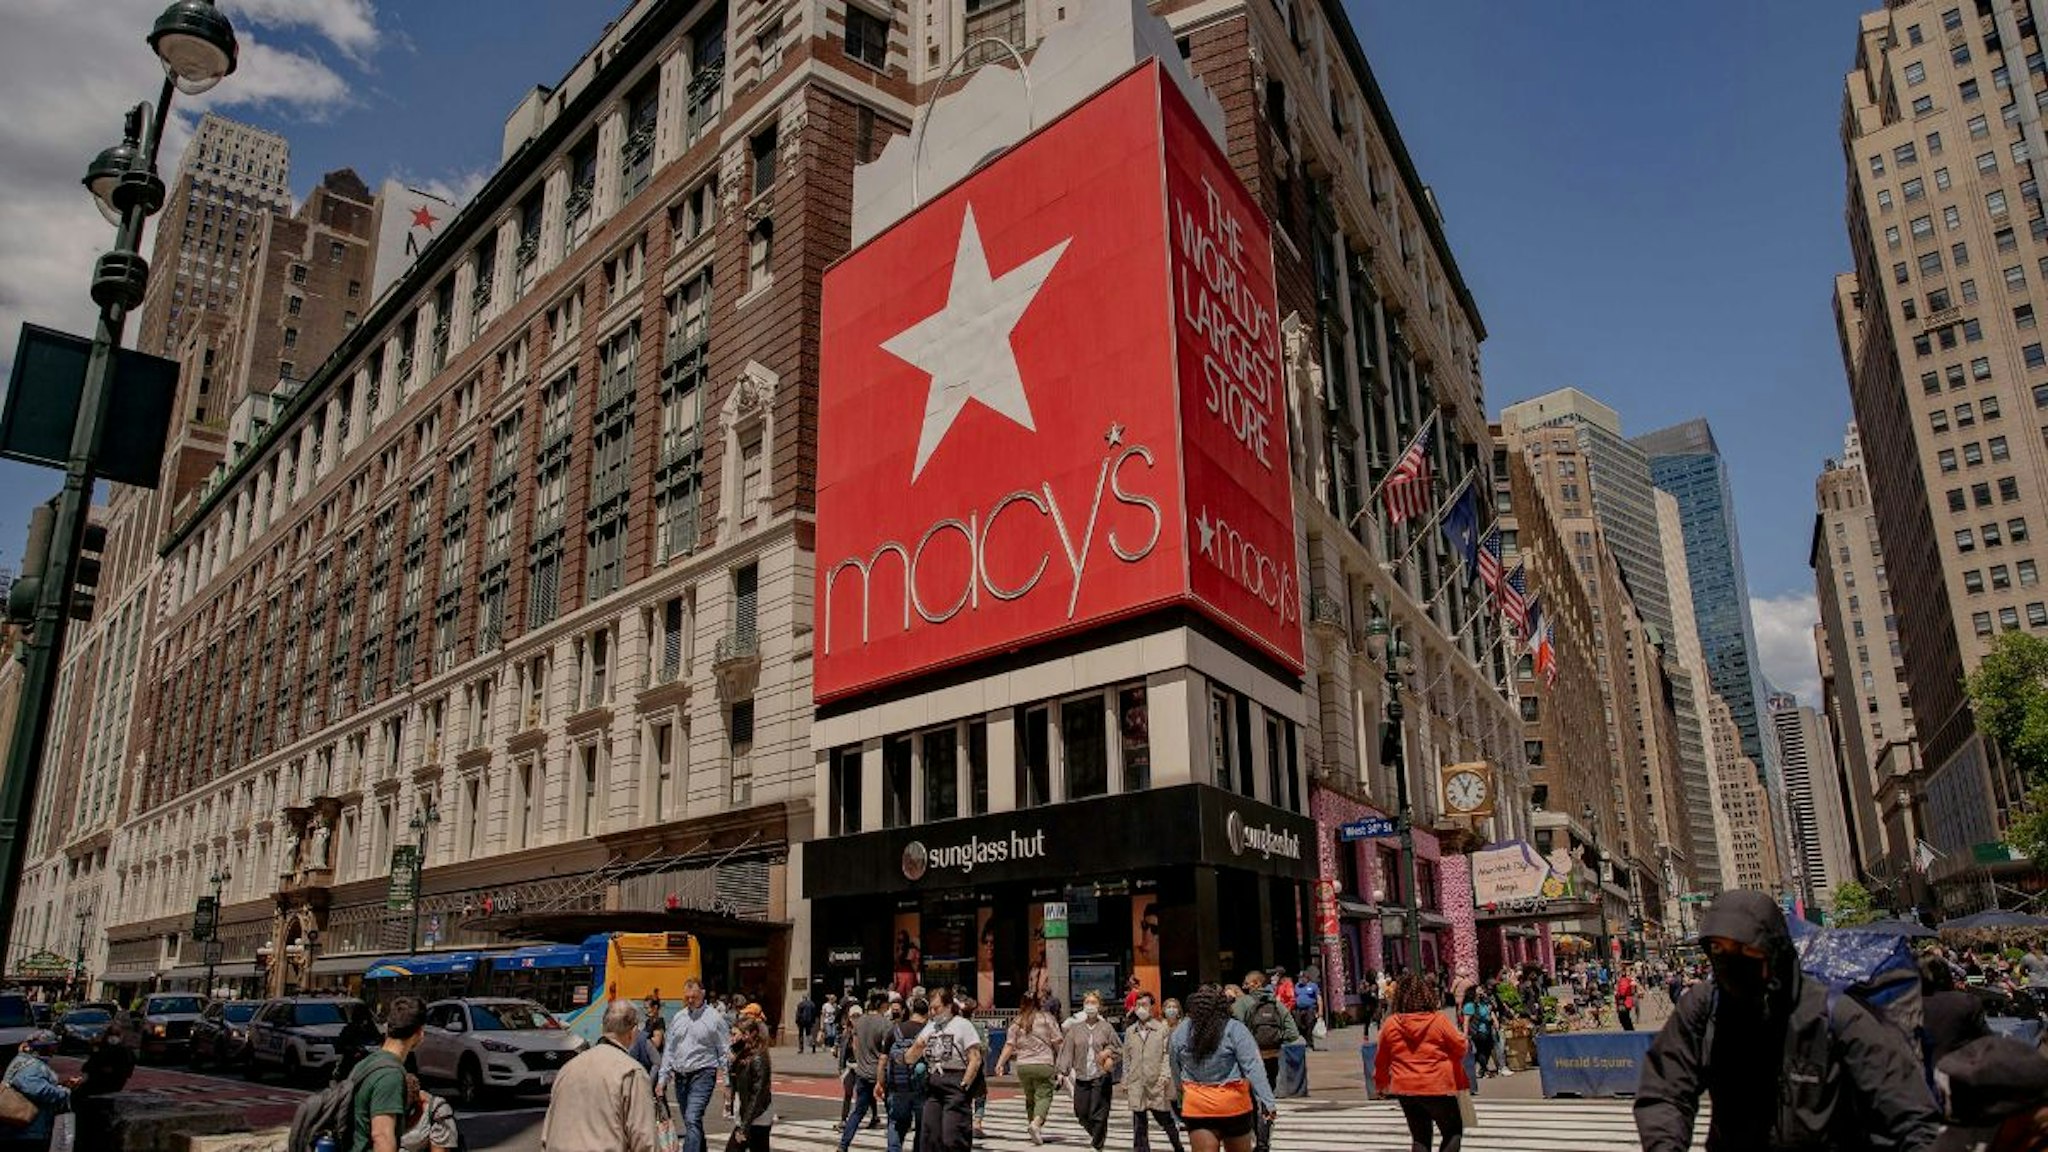 Pedestrians pass in front of Macy's Inc. flagship department store in the Herald Square area of New York, U.S., on Thursday, May 13, 2021.